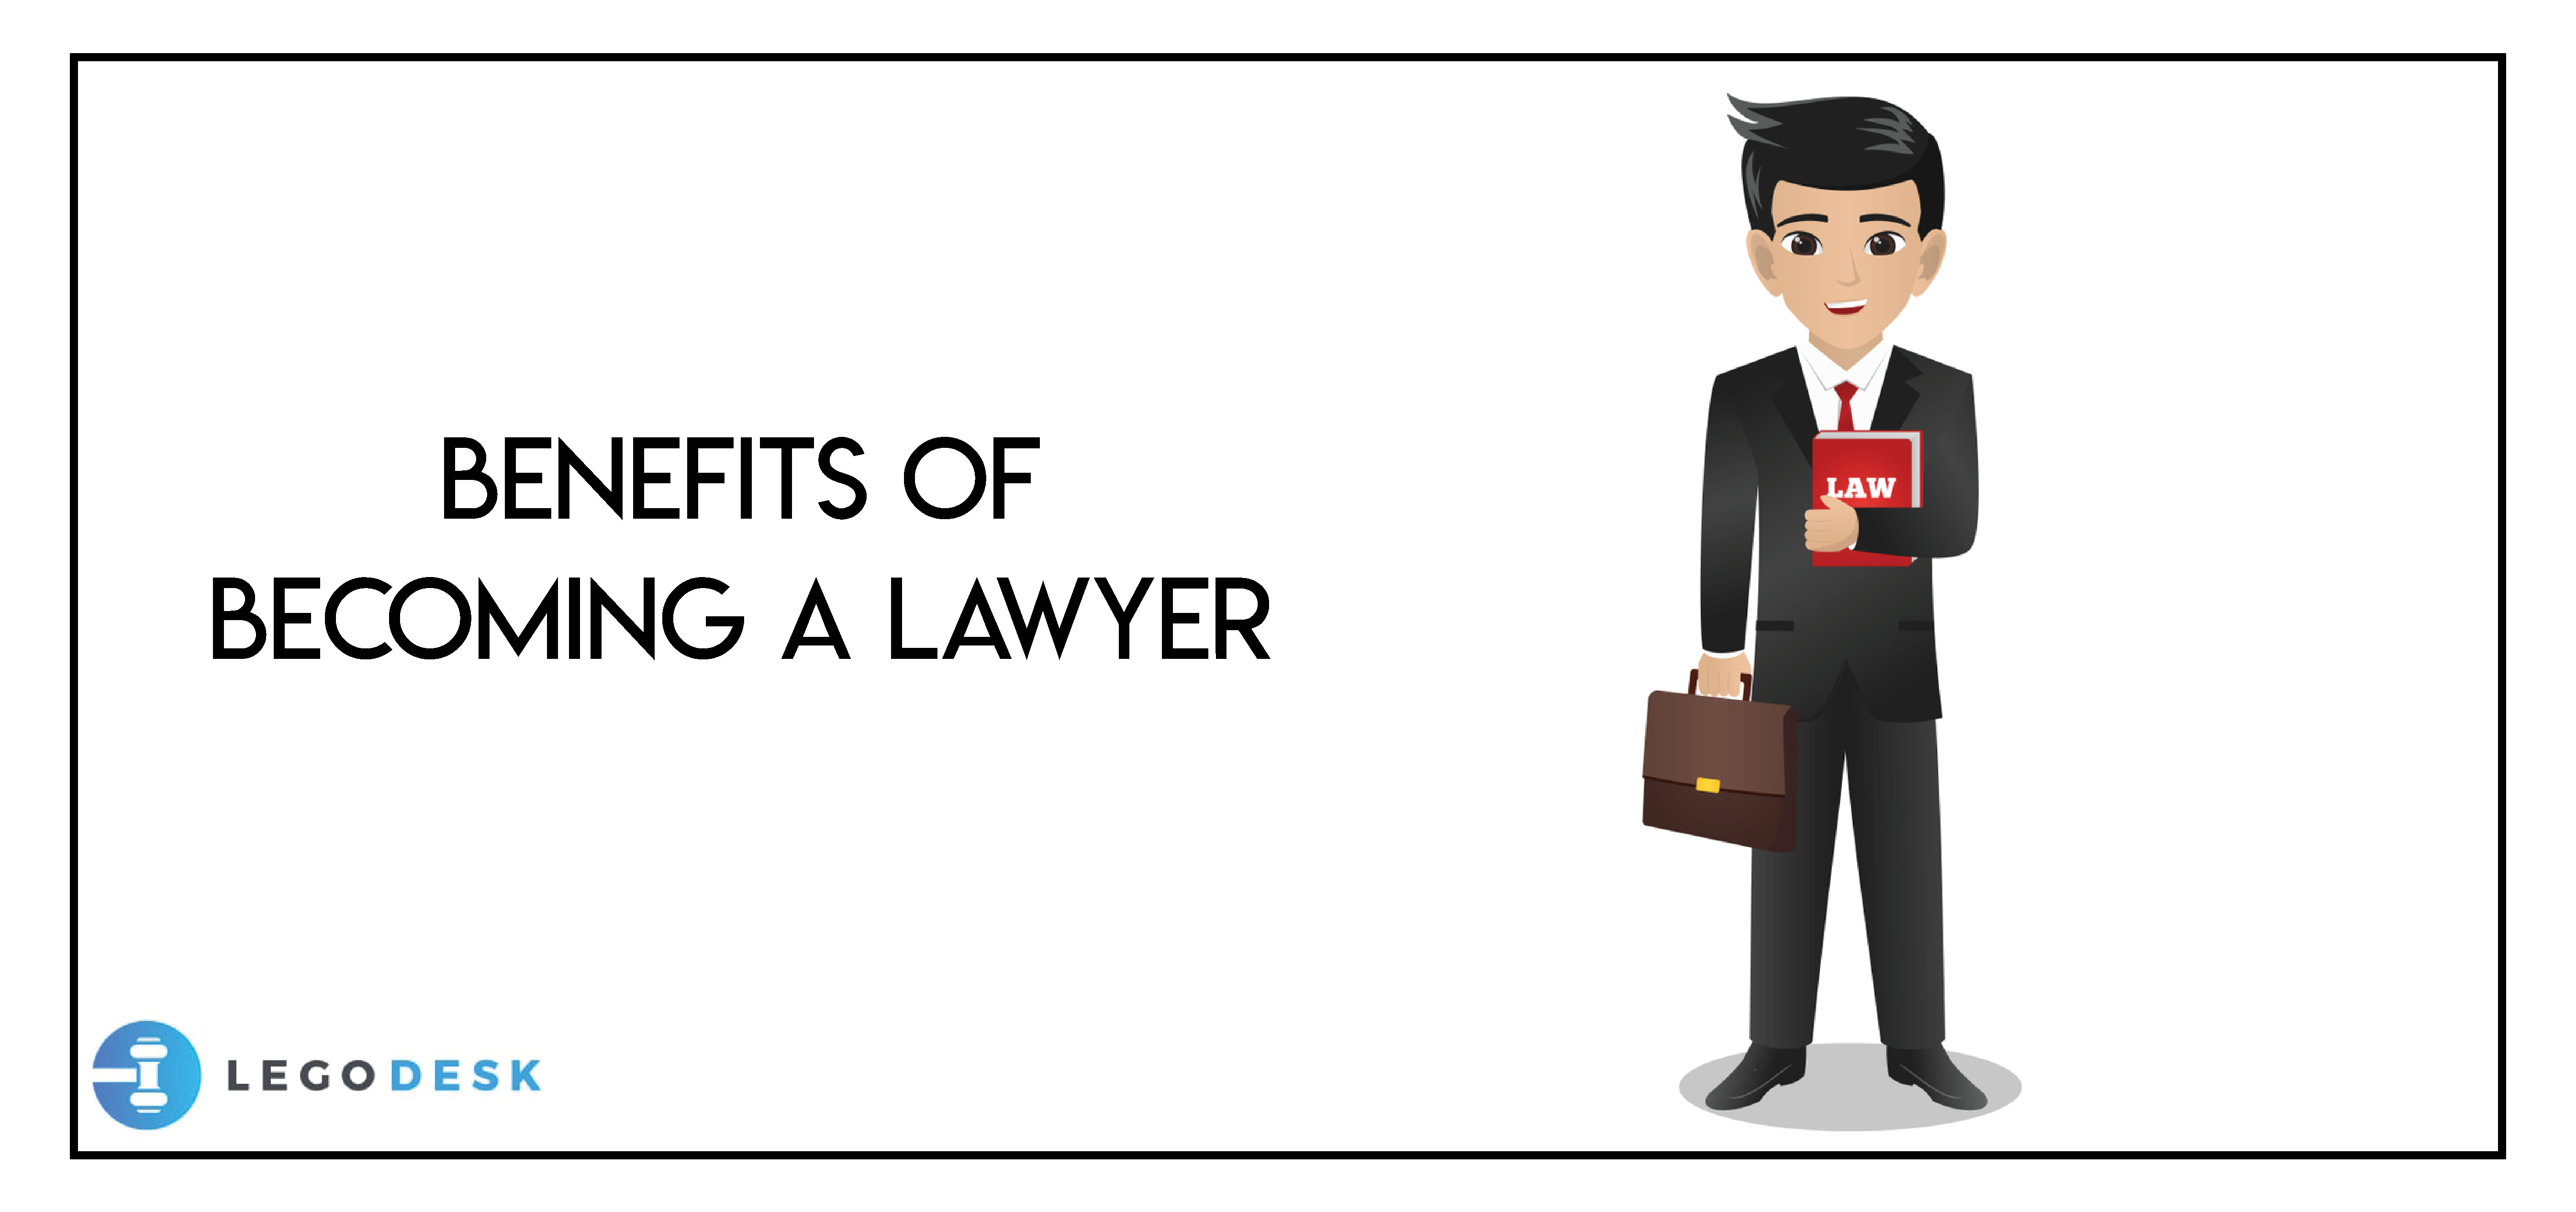 Benefits of Becoming a Lawyer